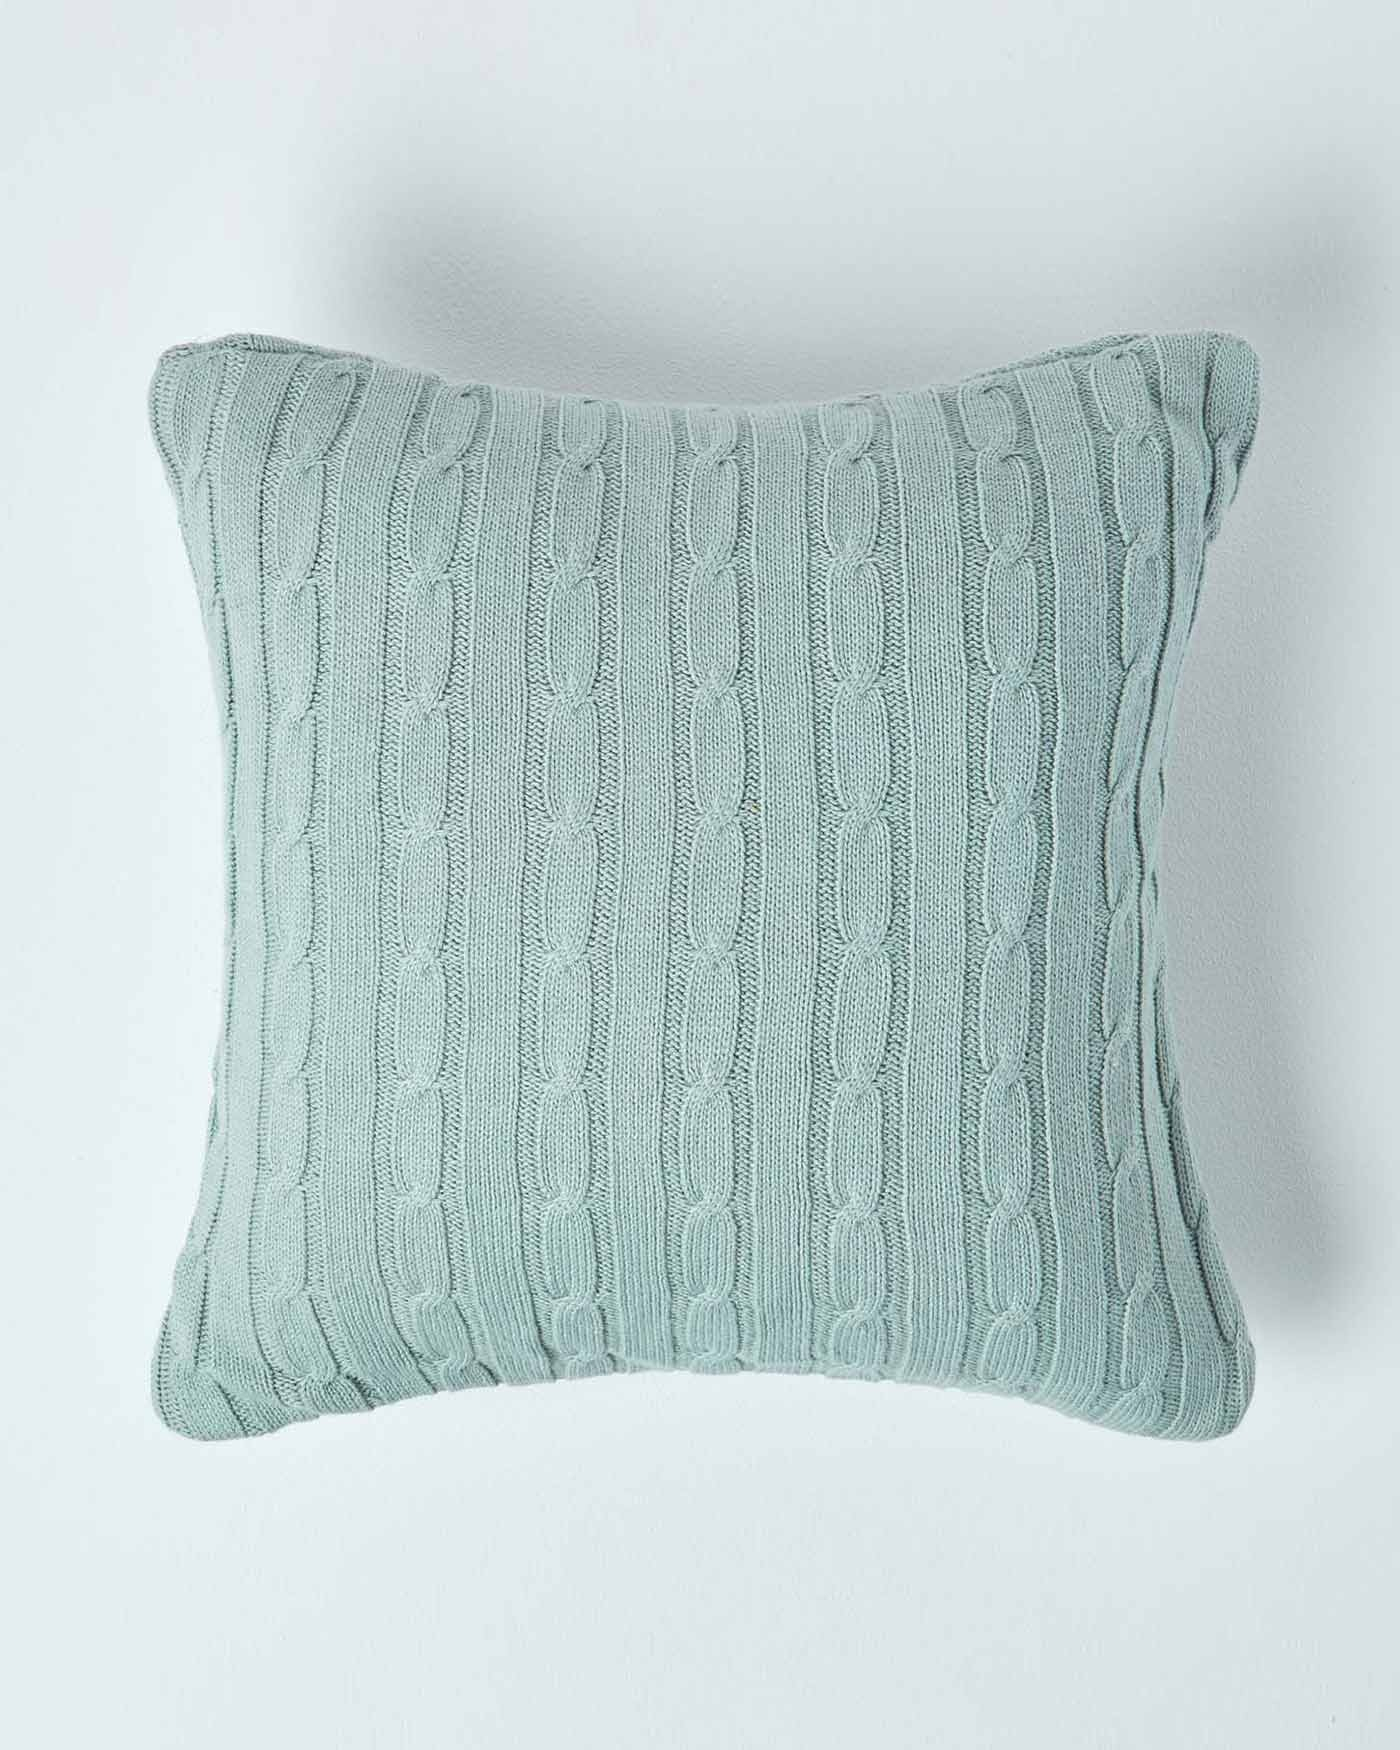 Knitting Pattern For Cushion Cover With Cables Cotton Cable Knit Cushion Covers